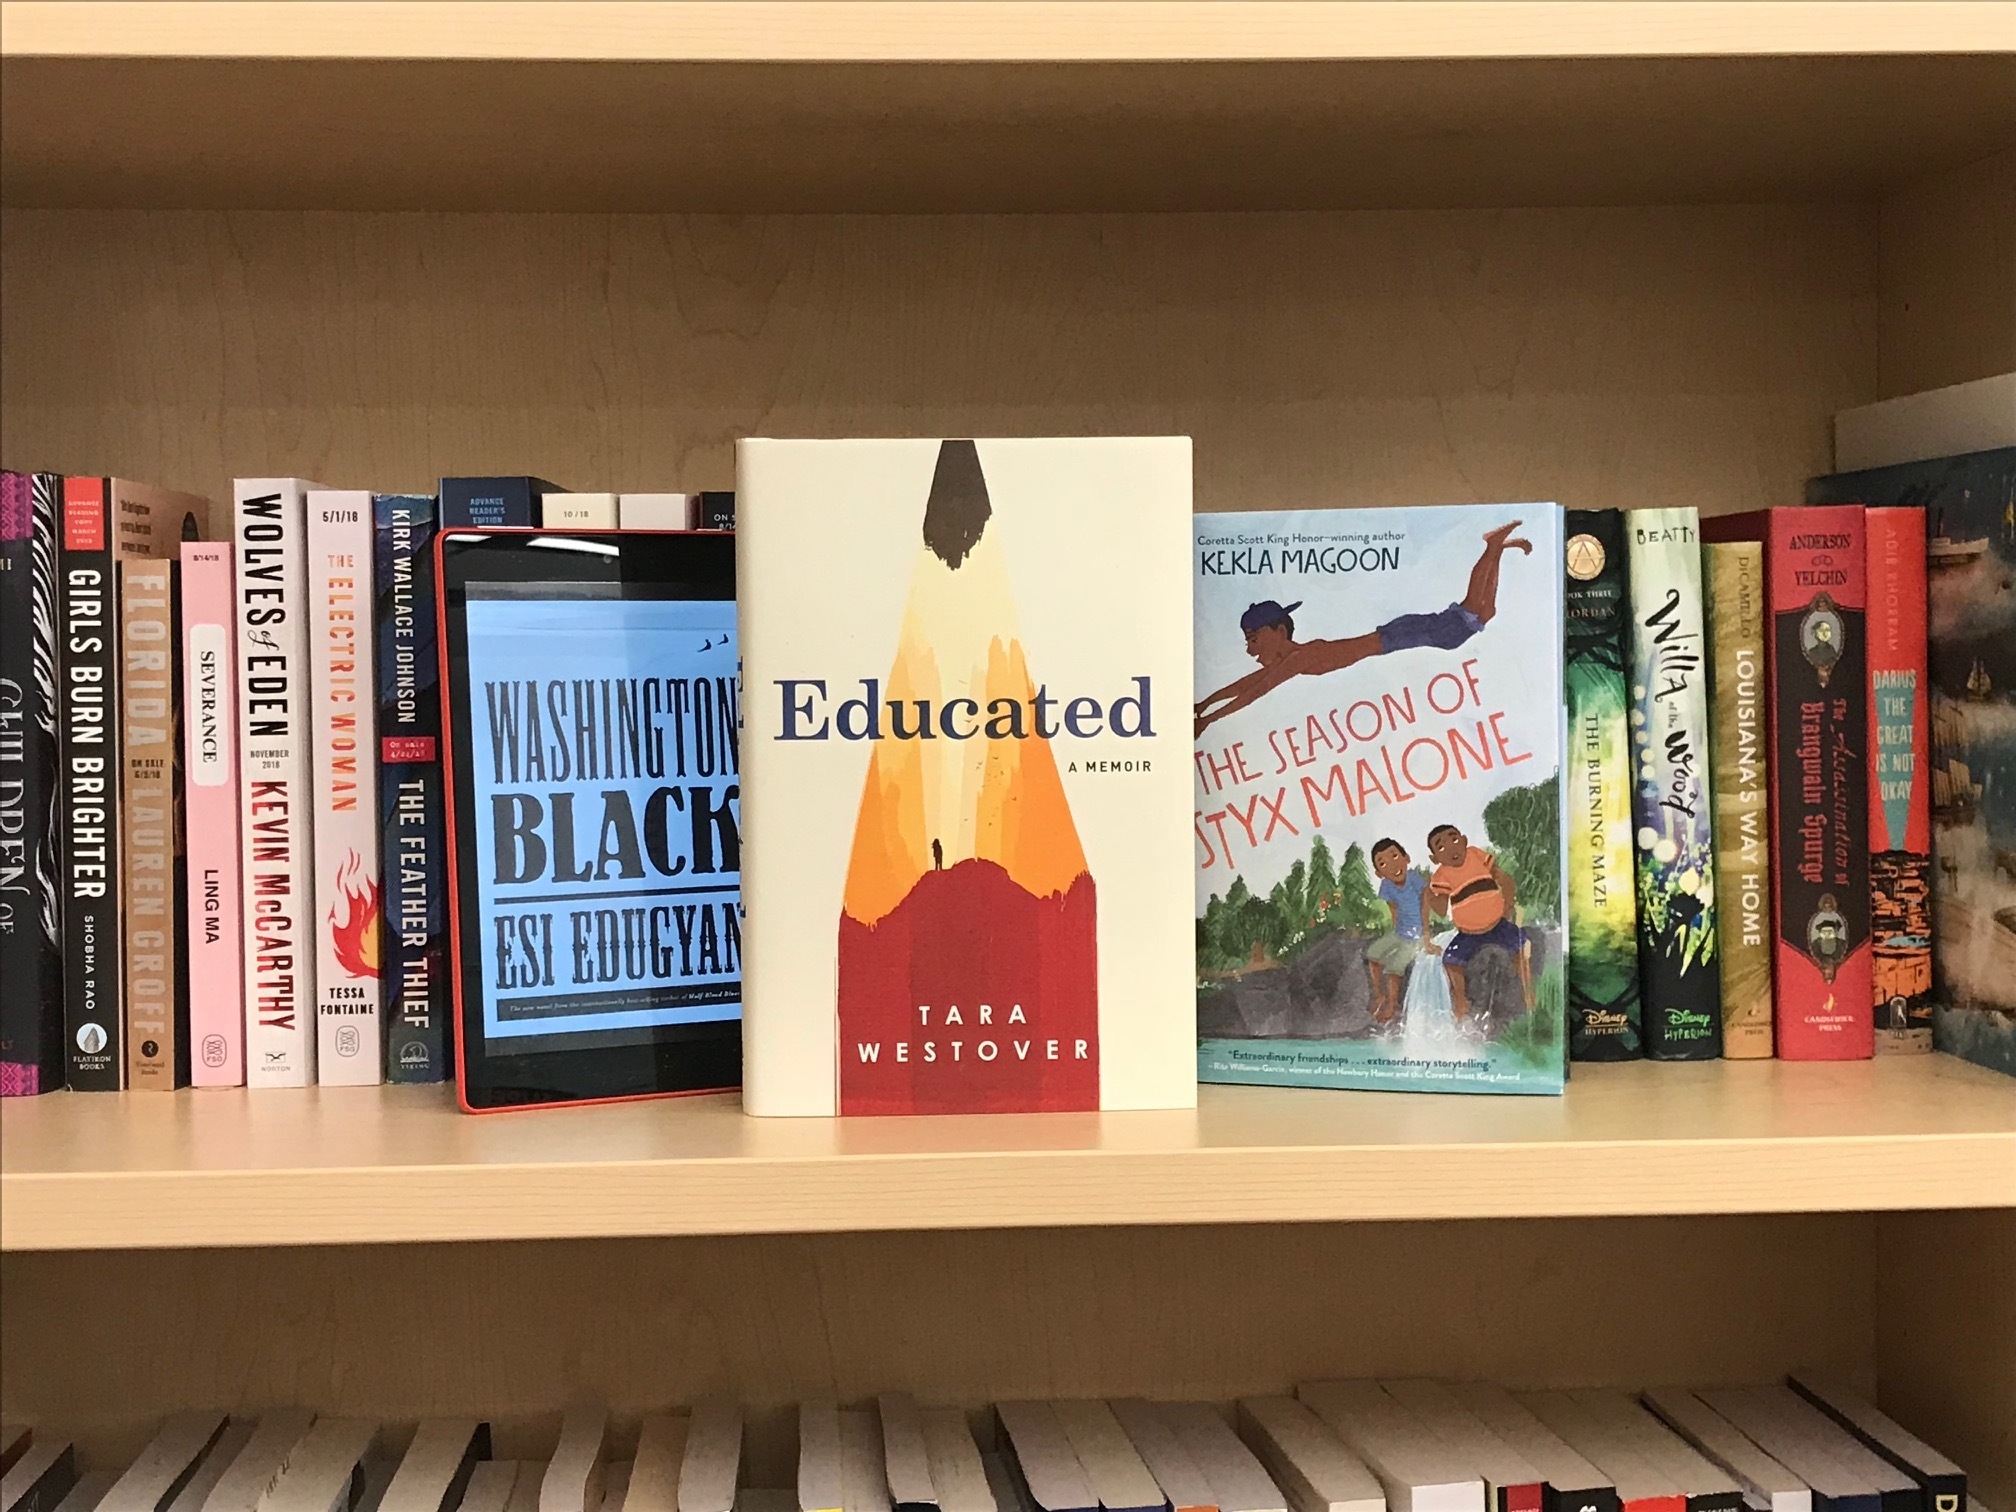 A bookshelf with dozens of books, including the best book of the year, Tara Westover's Educated: A Memoir, The Season of Styx Malone, and Washington Black.